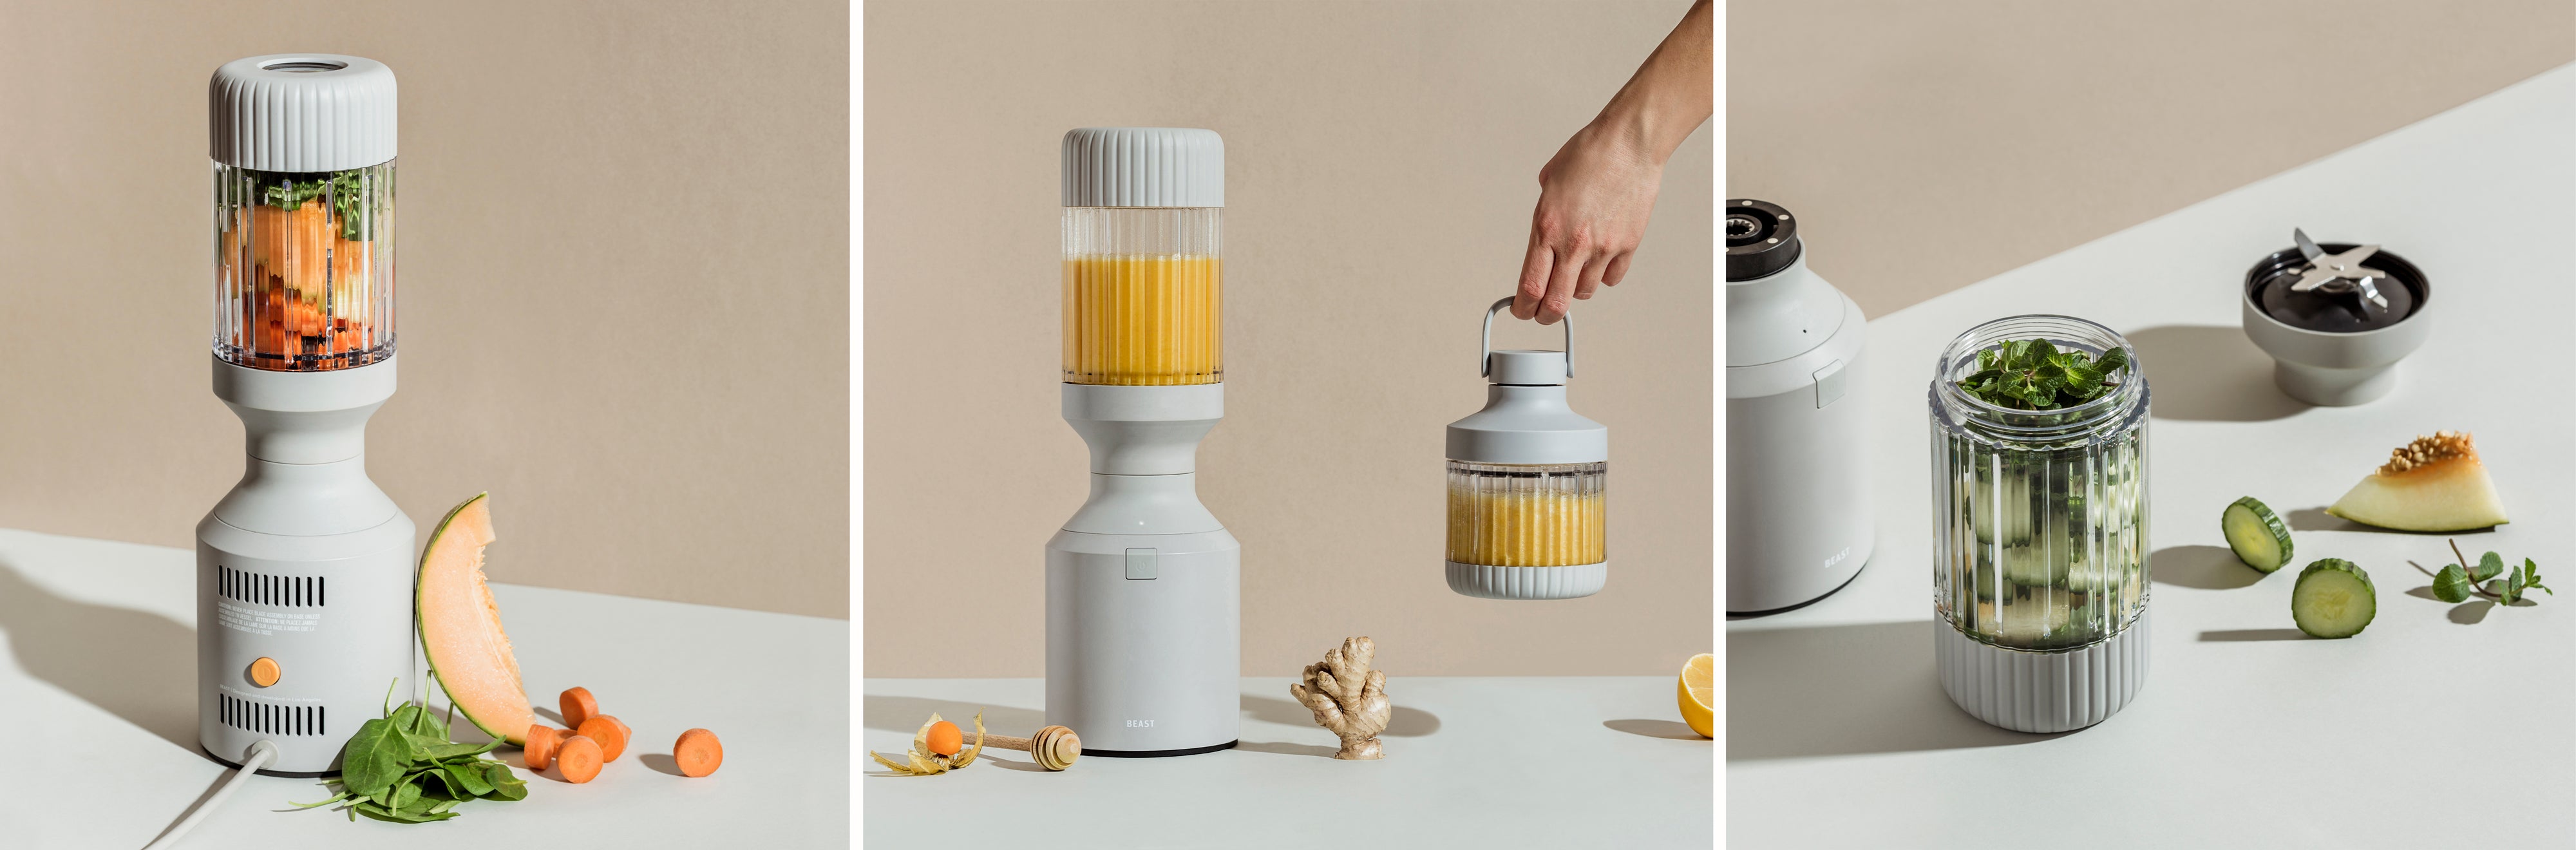 Wellness is Within Your Reach With Pro-Blender - ReadWrite